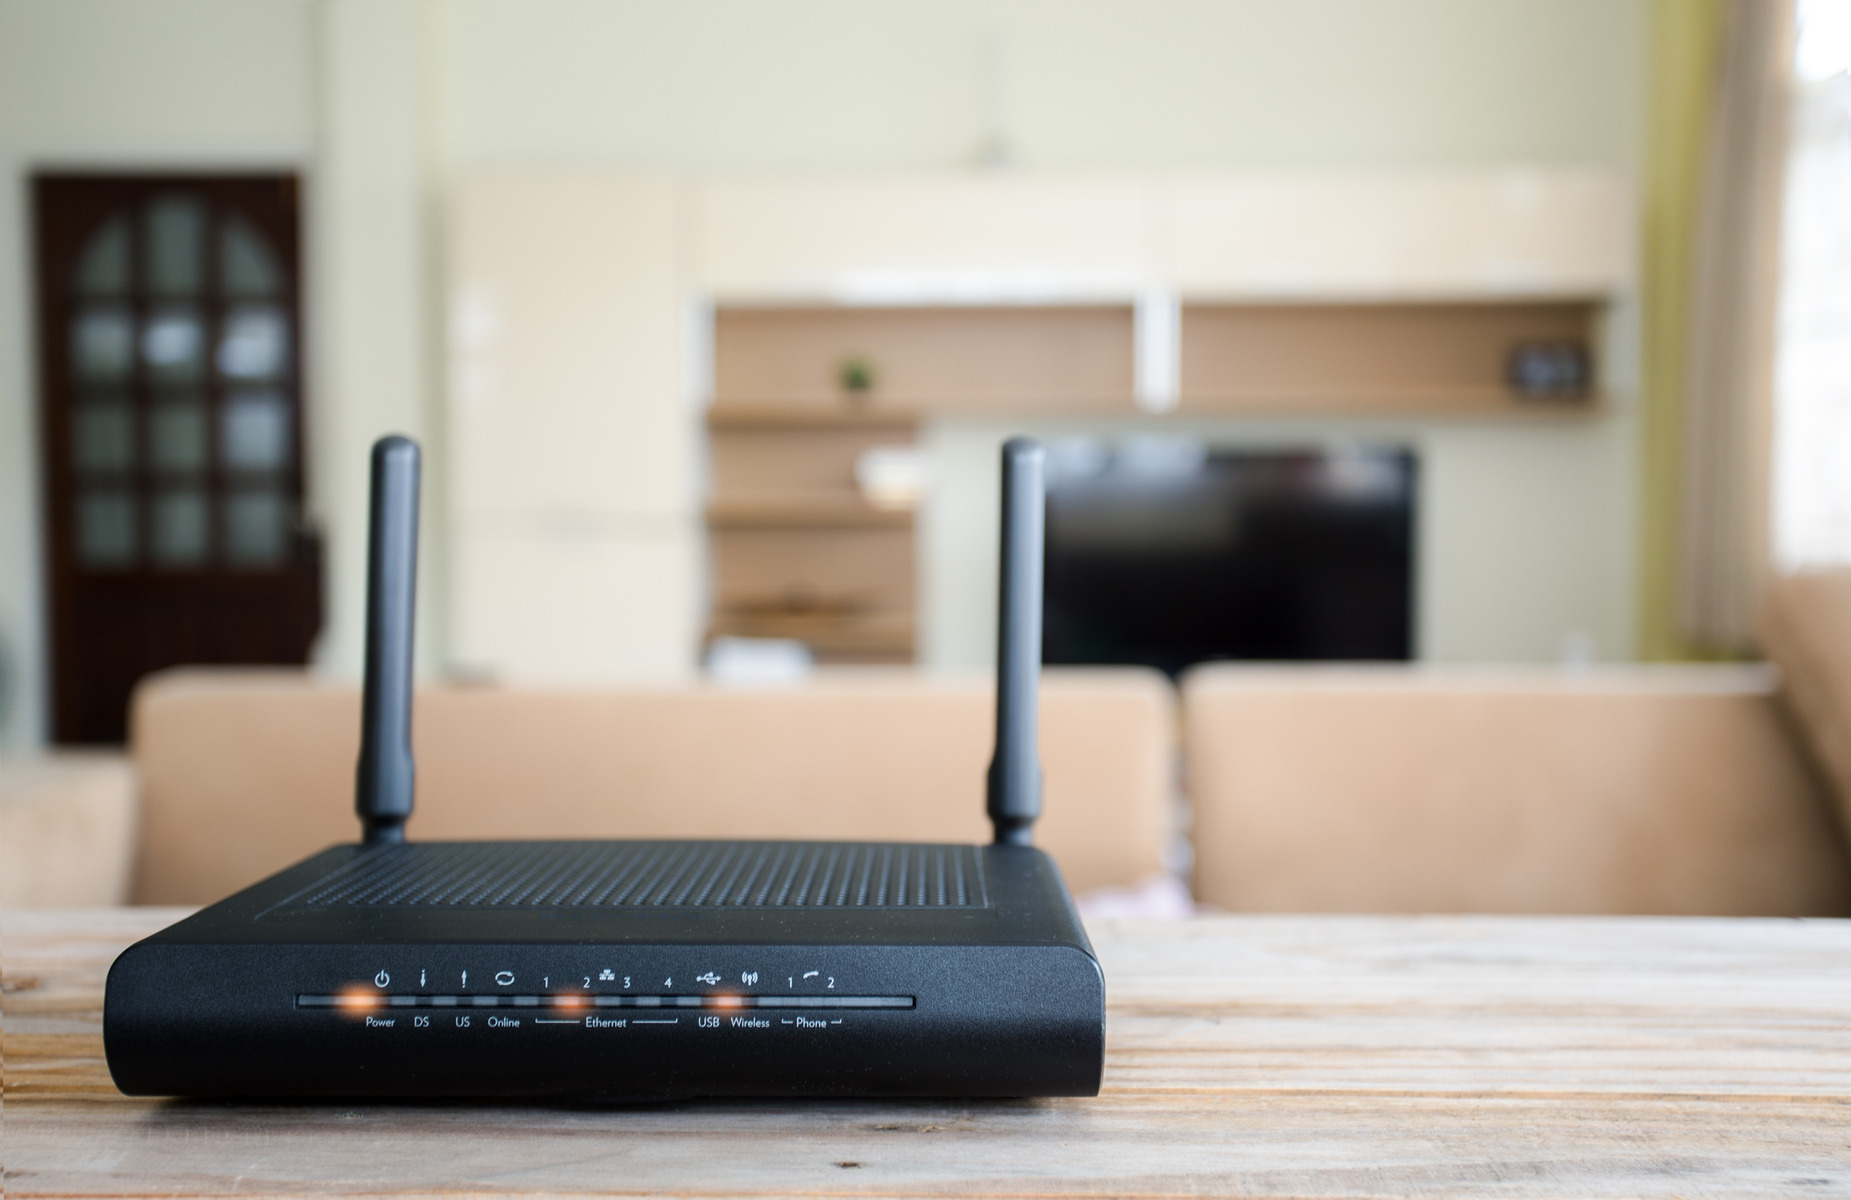 How Do I Change The Password On My Frontier Wireless Router